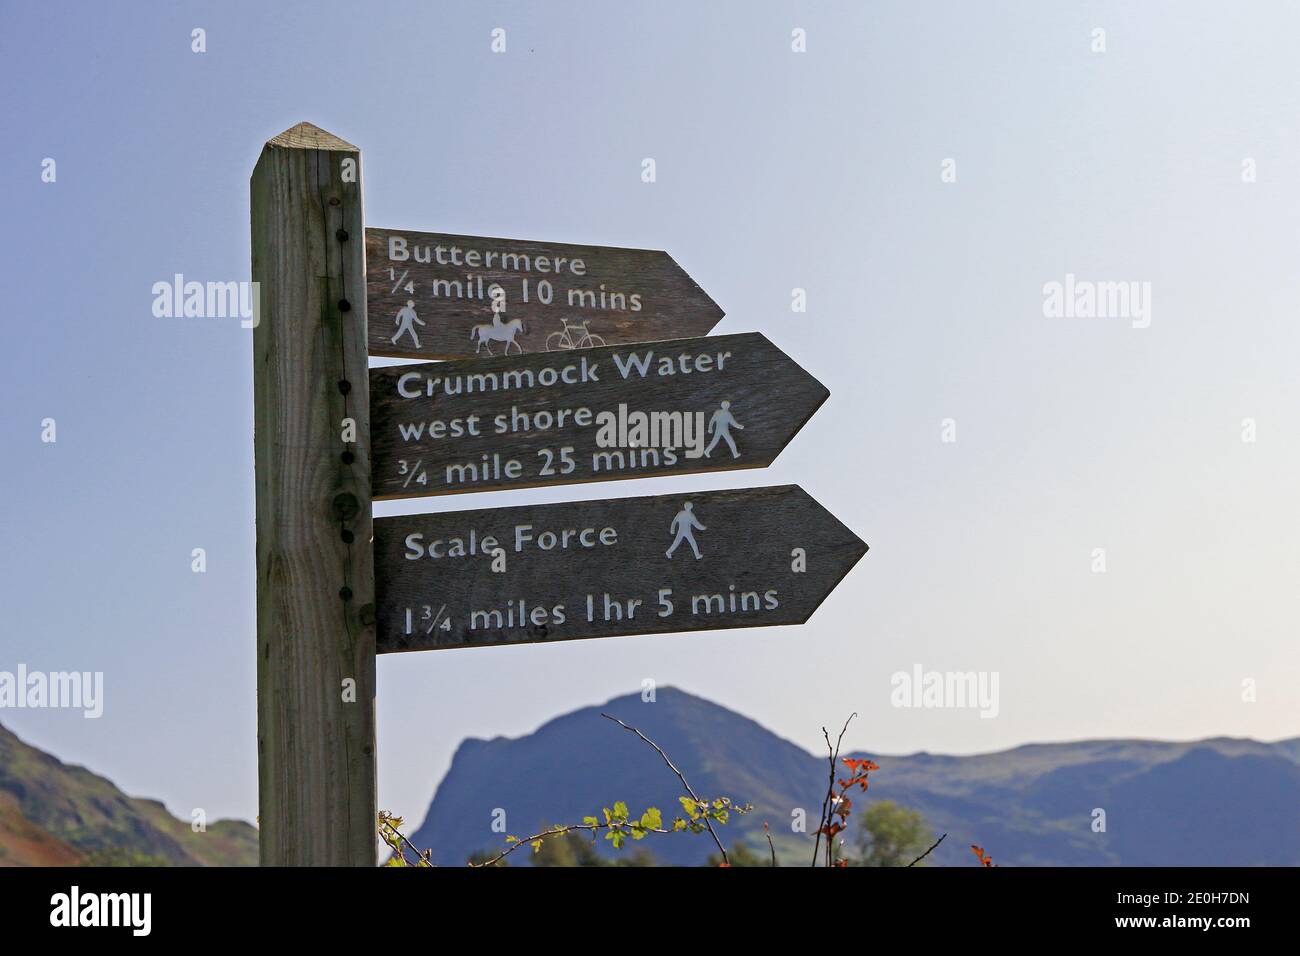 Wooden signpost showing destinations and walking times, Buttermere Stock Photo